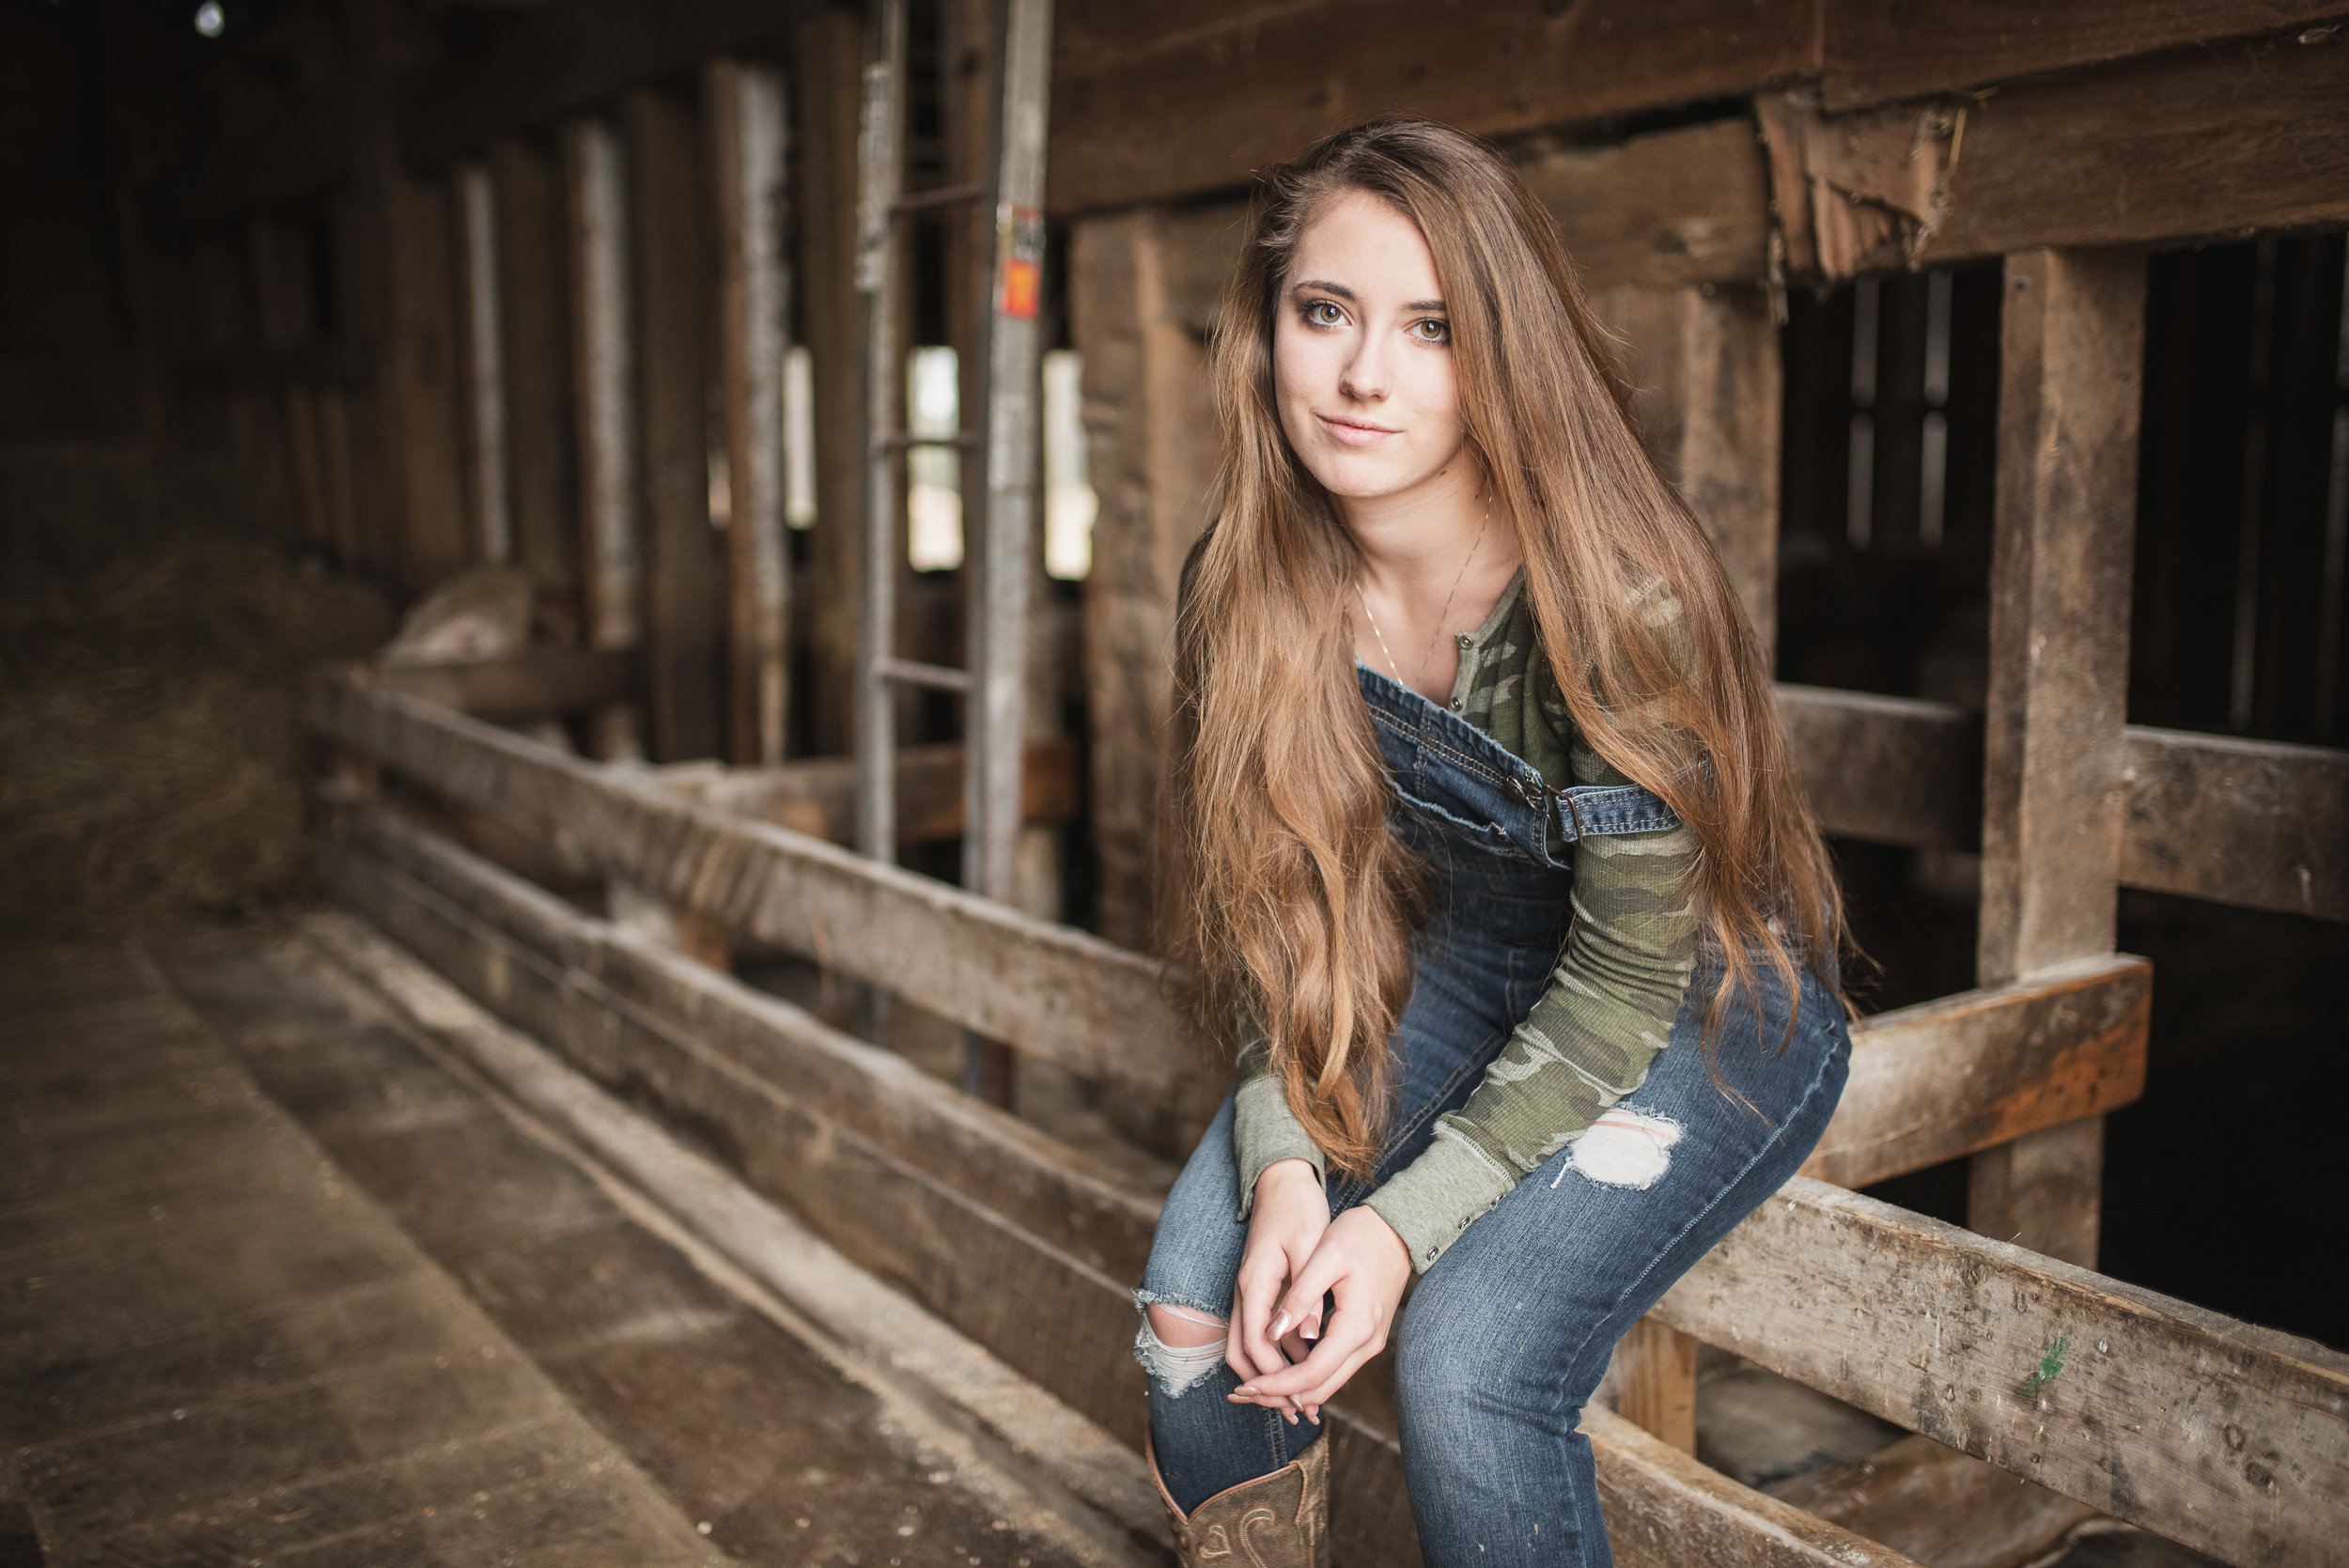 Sitting Portait of Country Girl With Long Hair